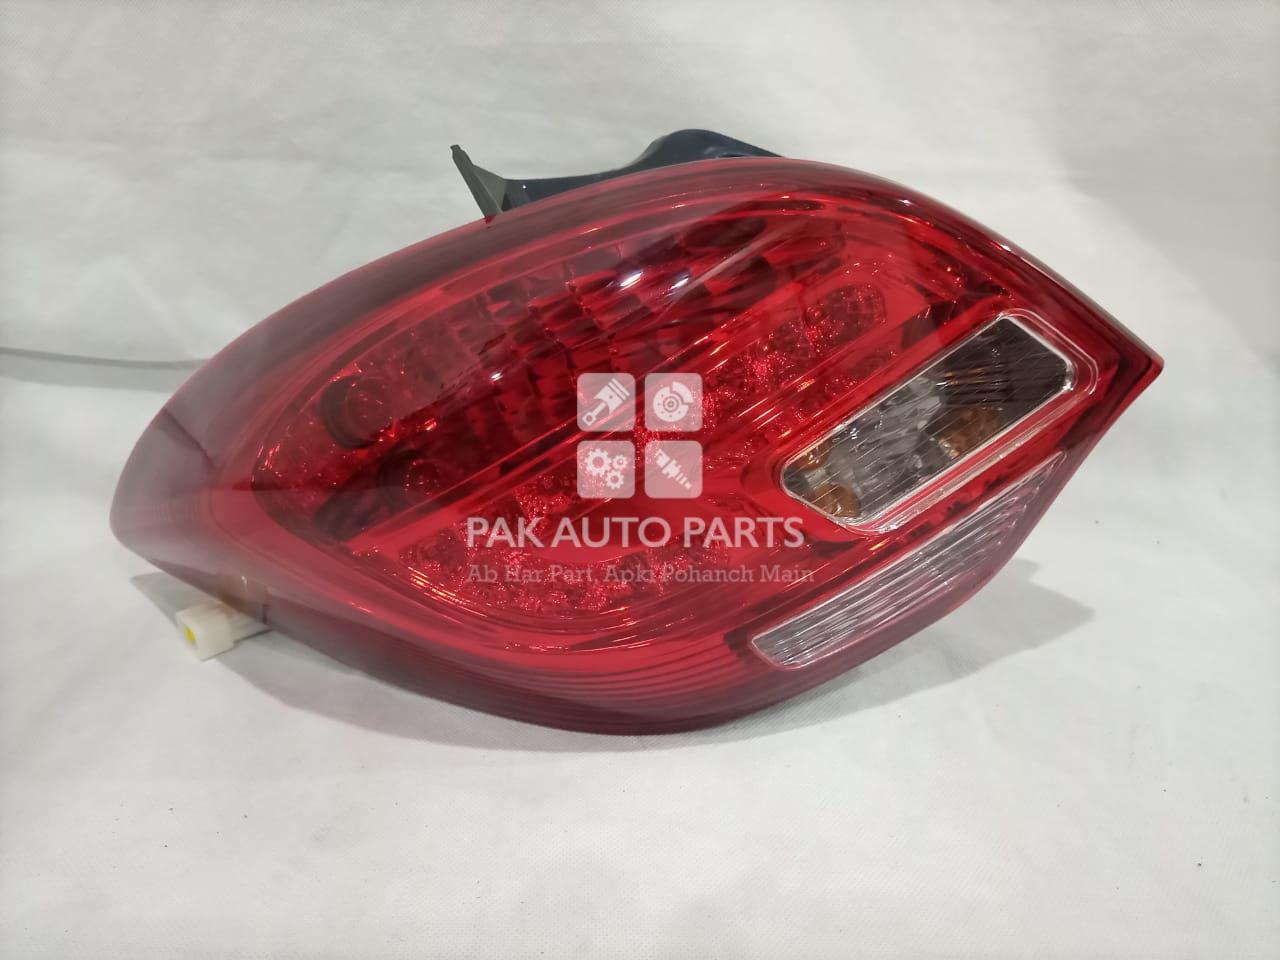 Picture of Prince Pearl Tail Light (Backlight)